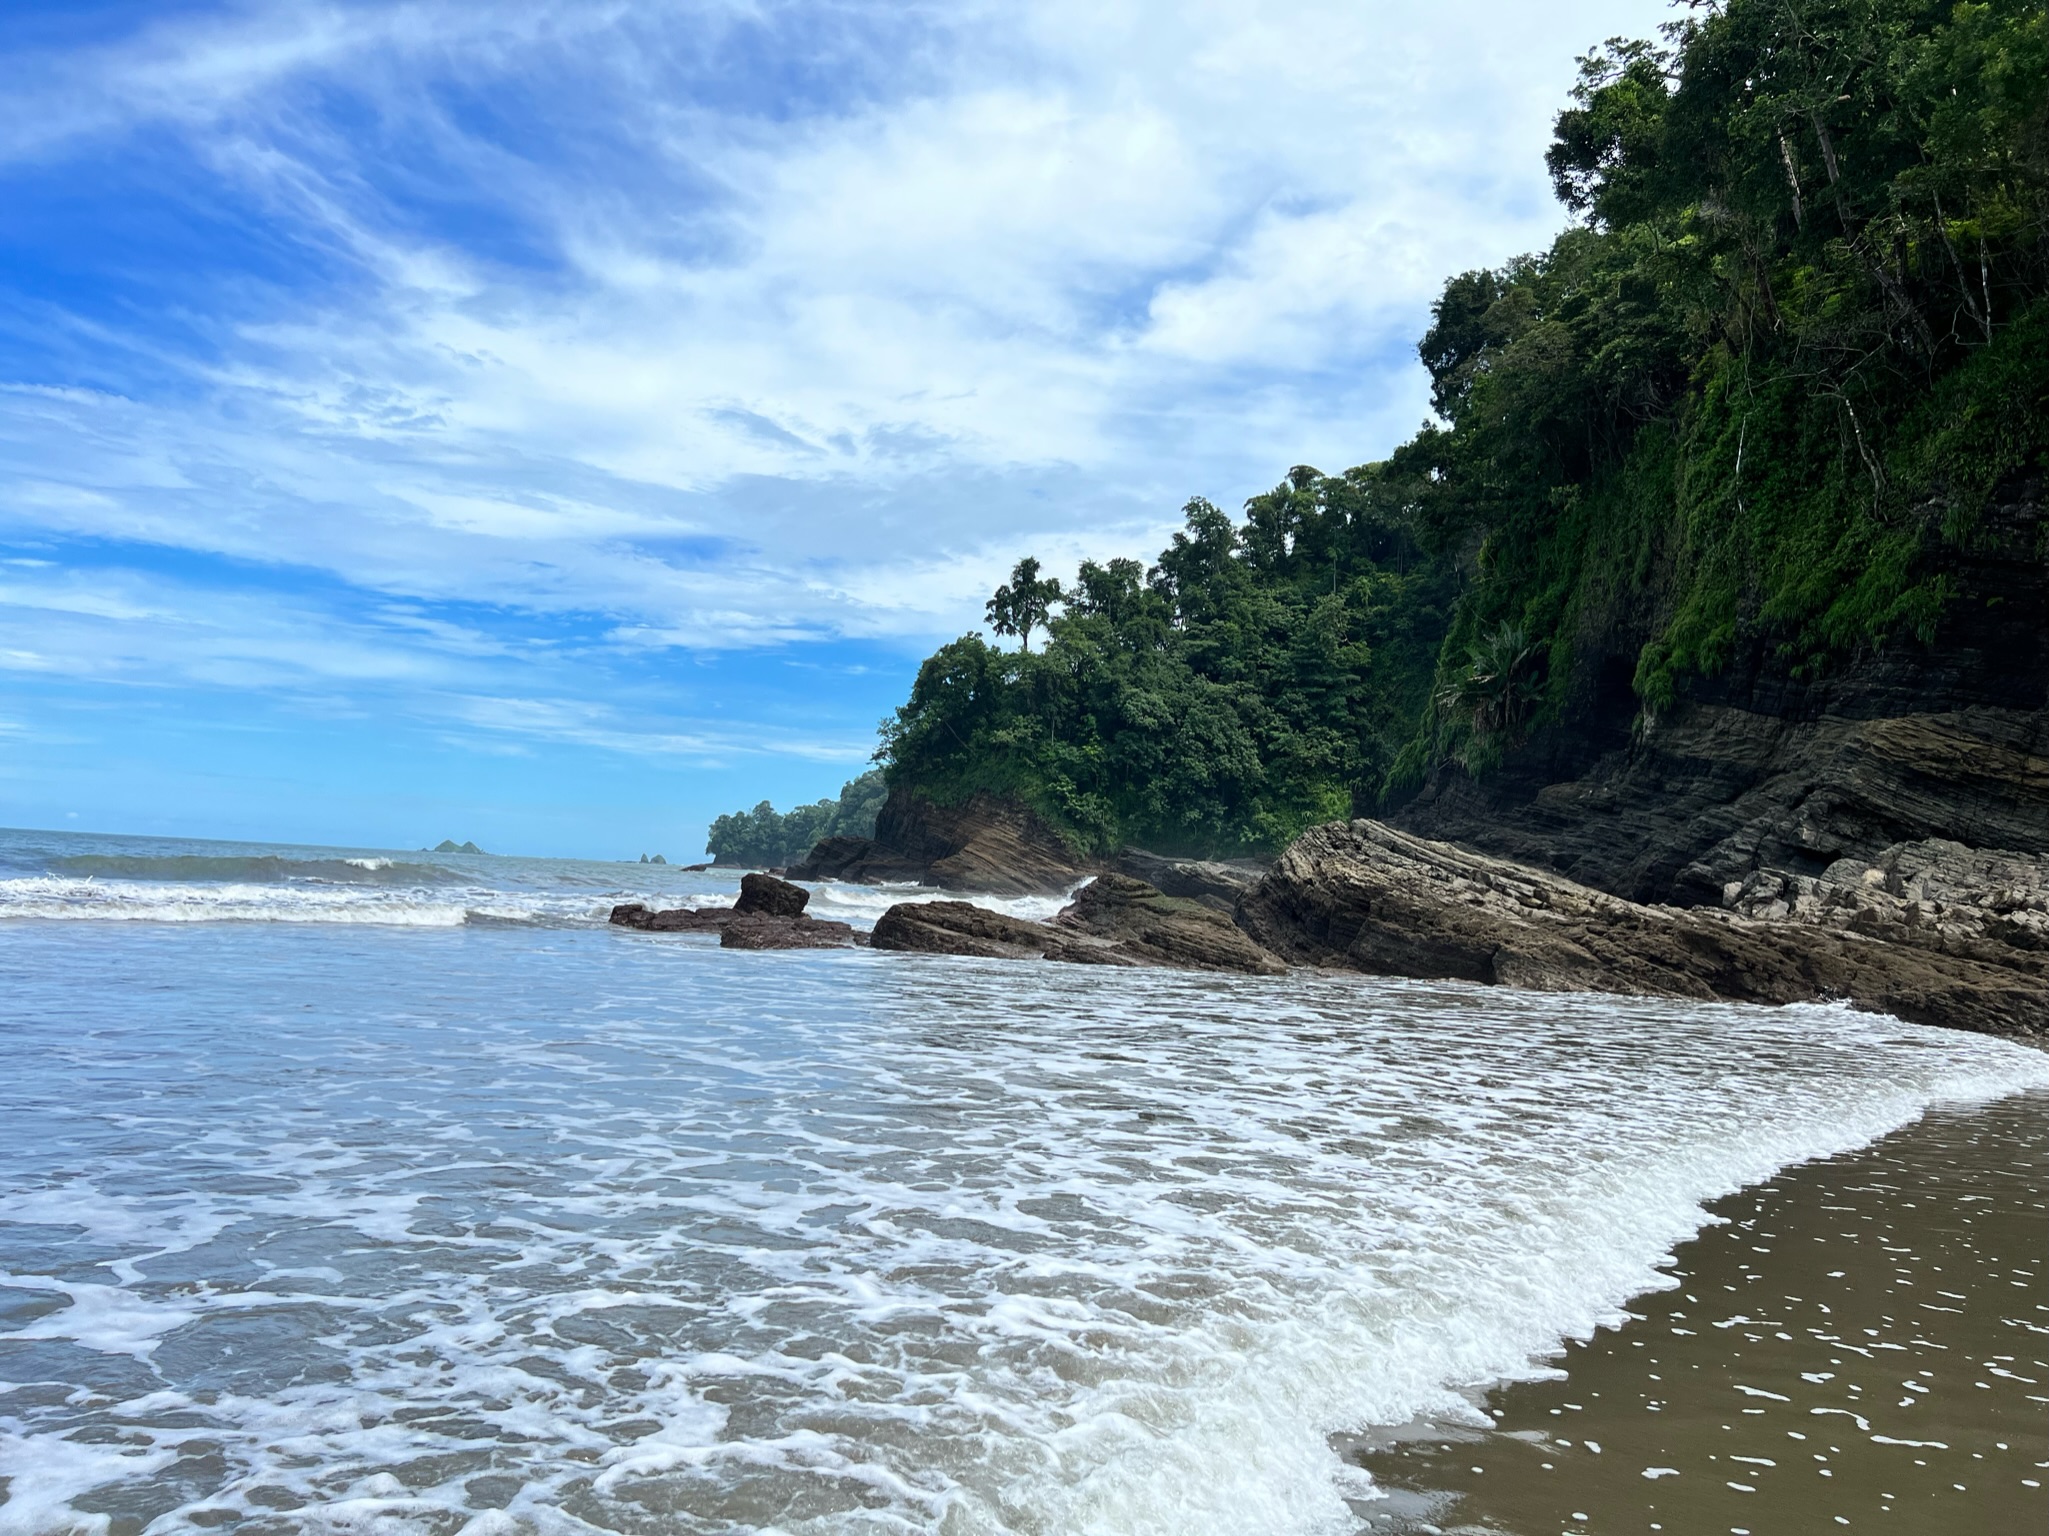 Top 7 Reasons to Add Costa Rica to Your Travel List